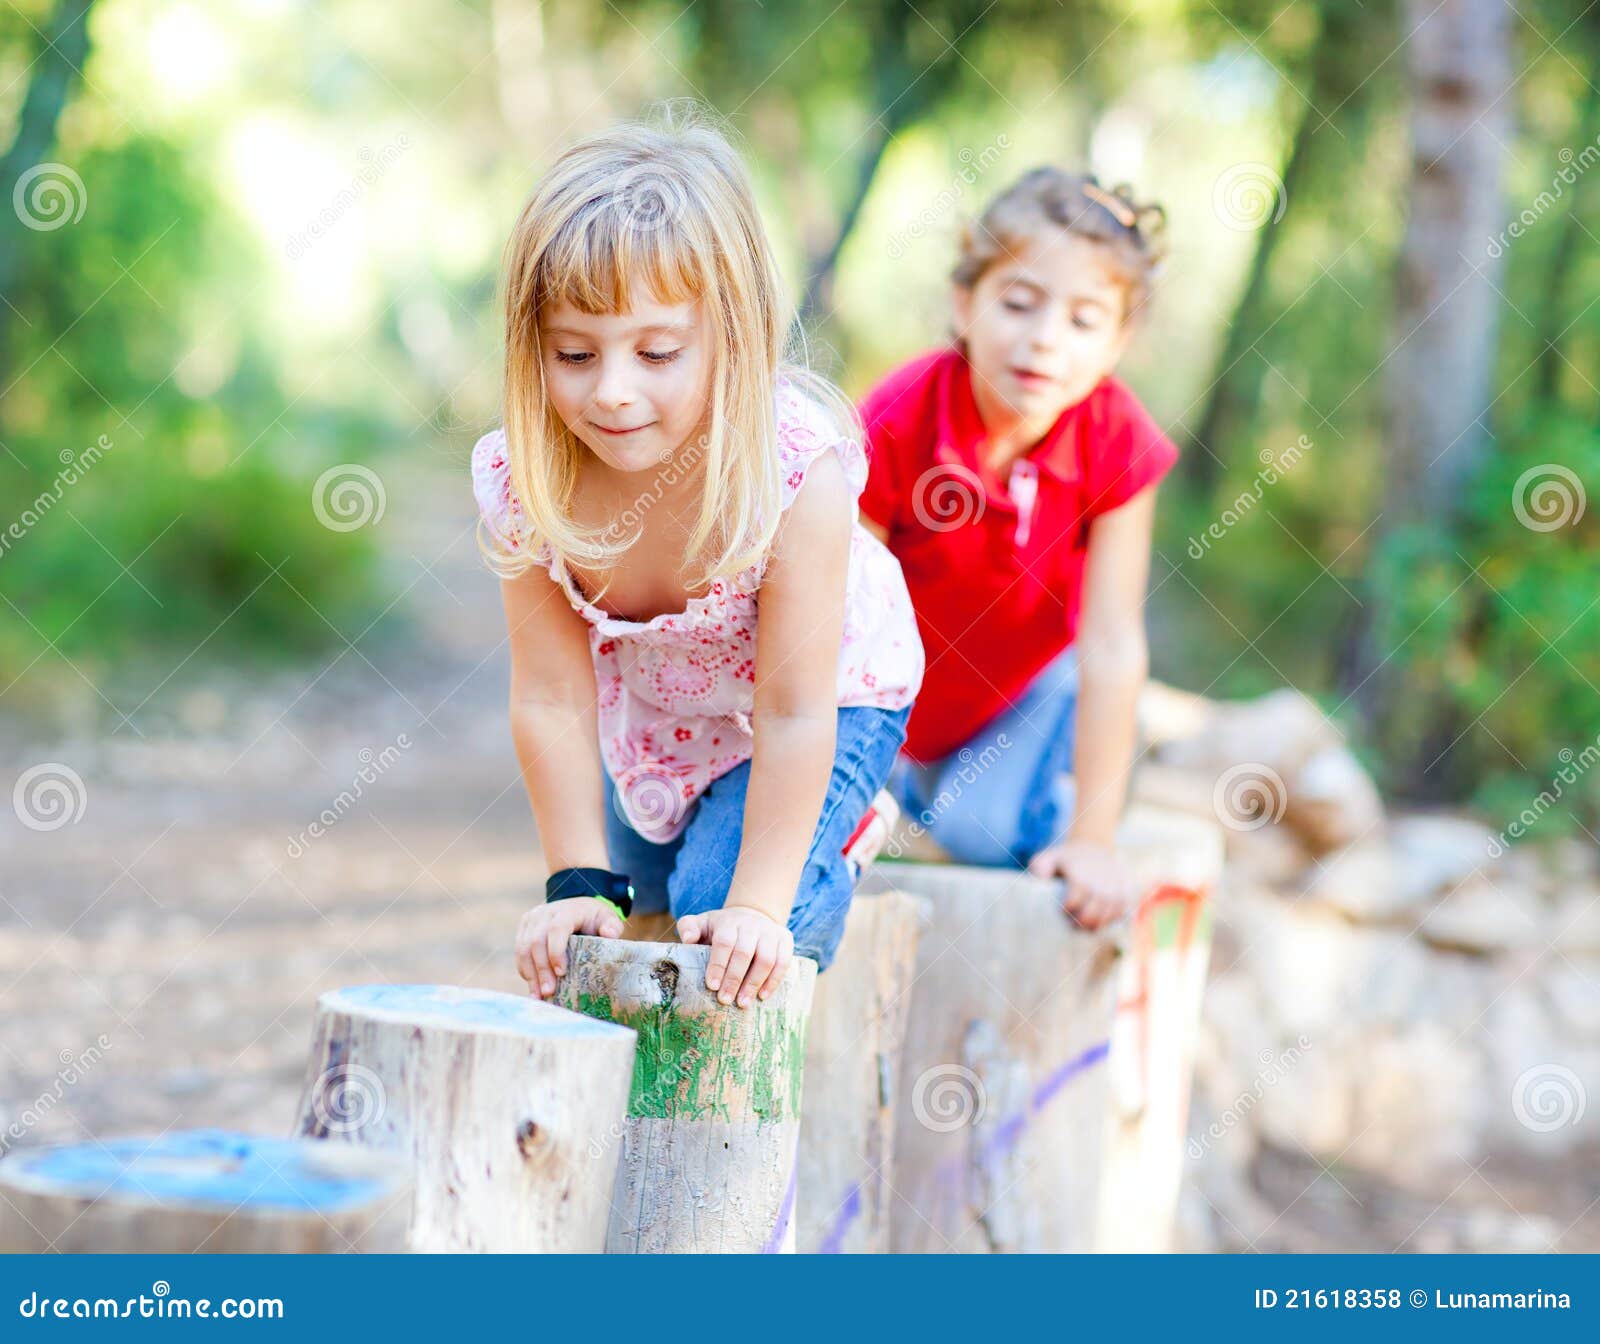 kid girls playing on trunks in forest nature